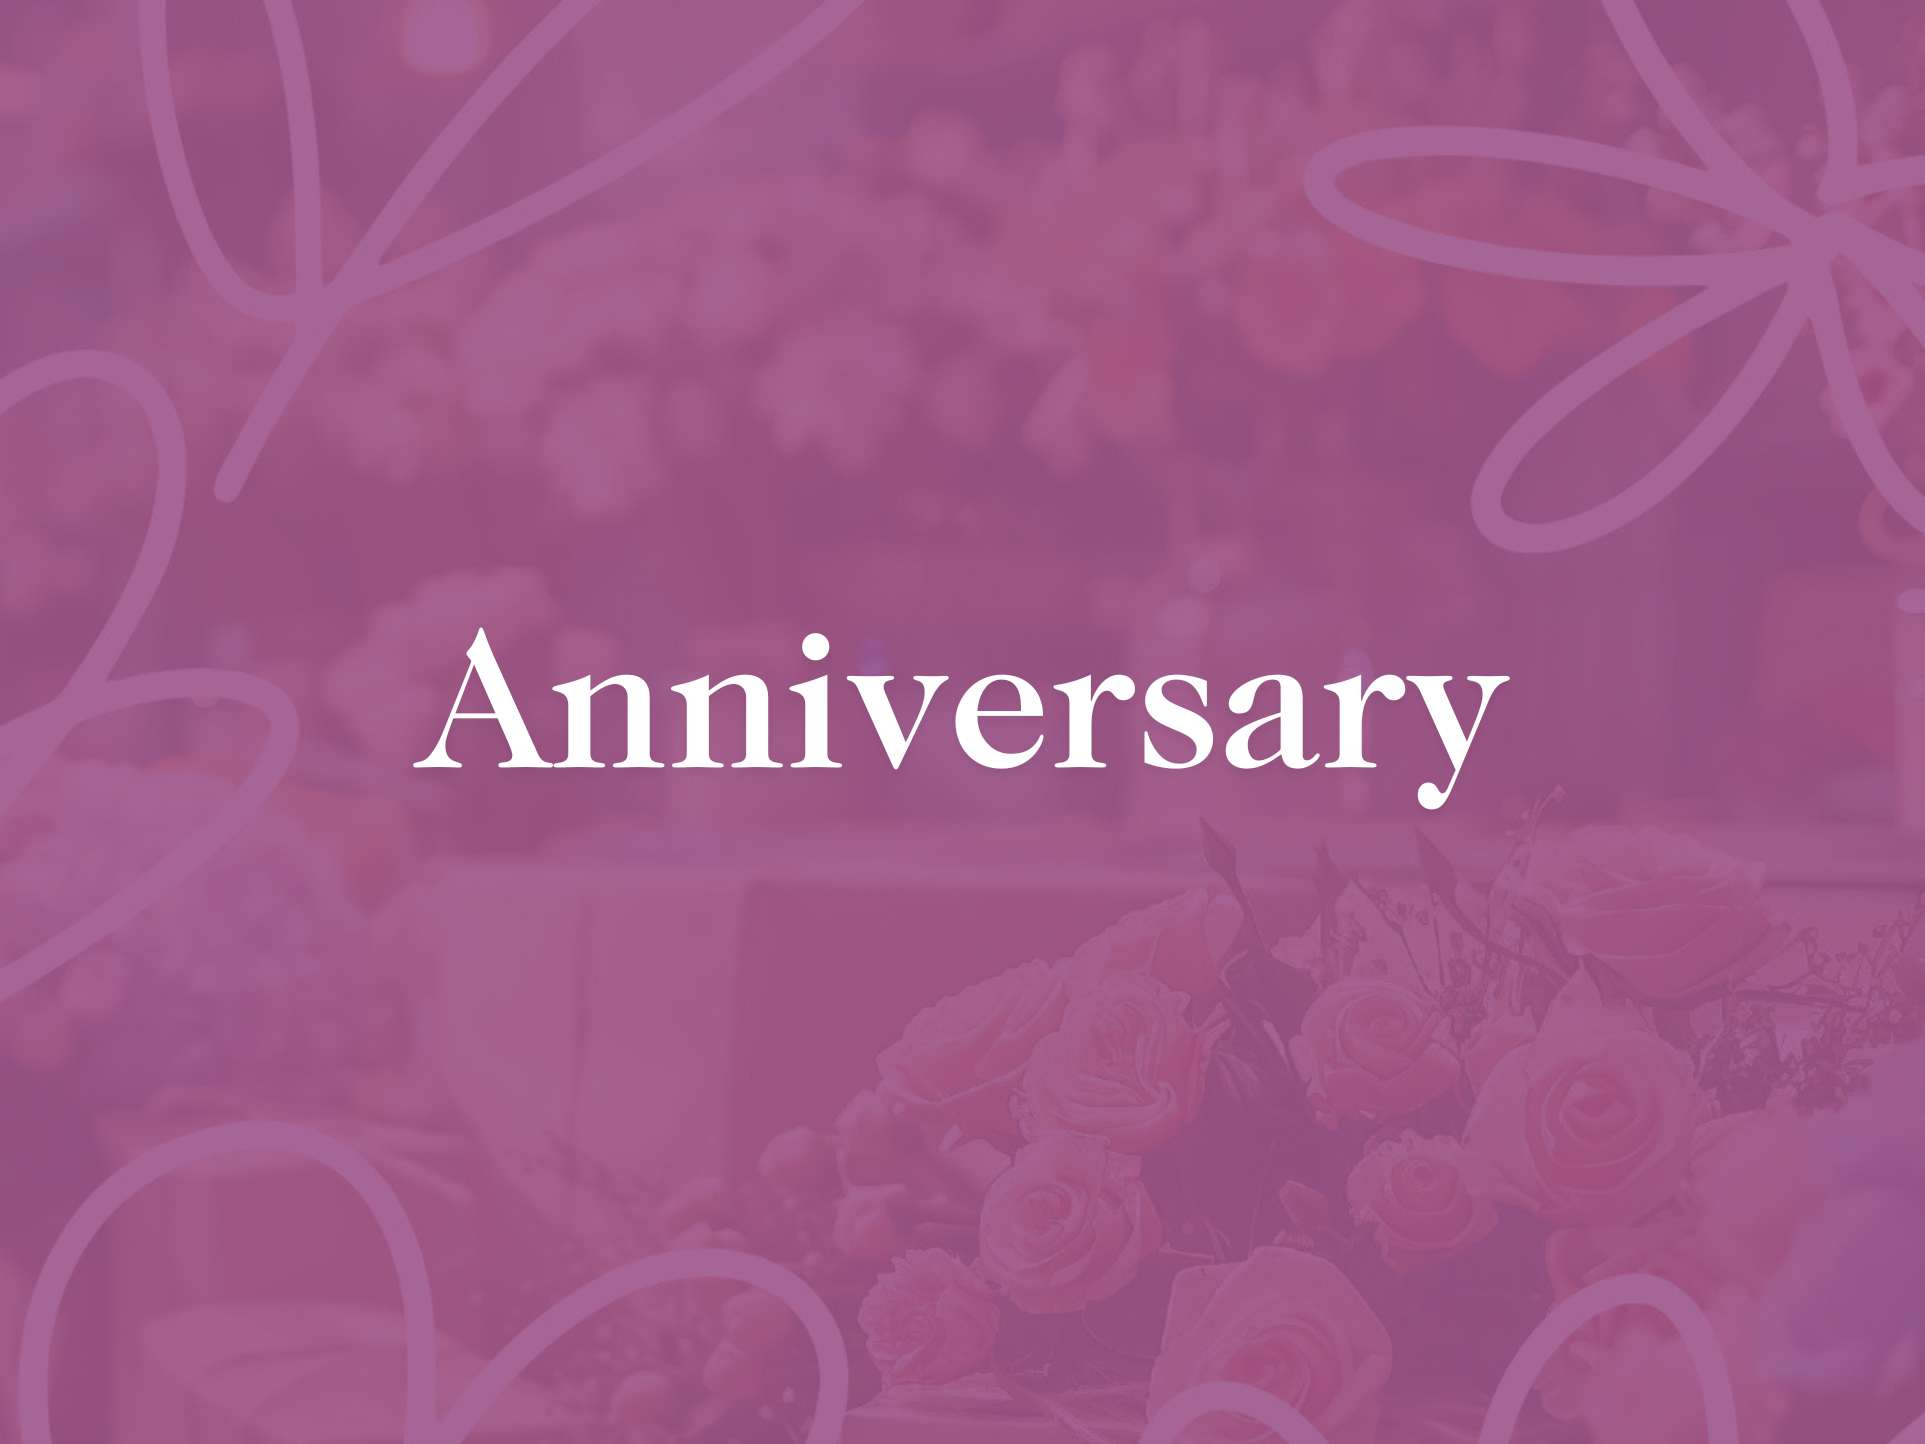 Celebratory 'Anniversary' collection of exquisite floral arrangements, perfectly capturing the essence of romance and enduring affection, presented by Fabulous Flowers and Gifts.